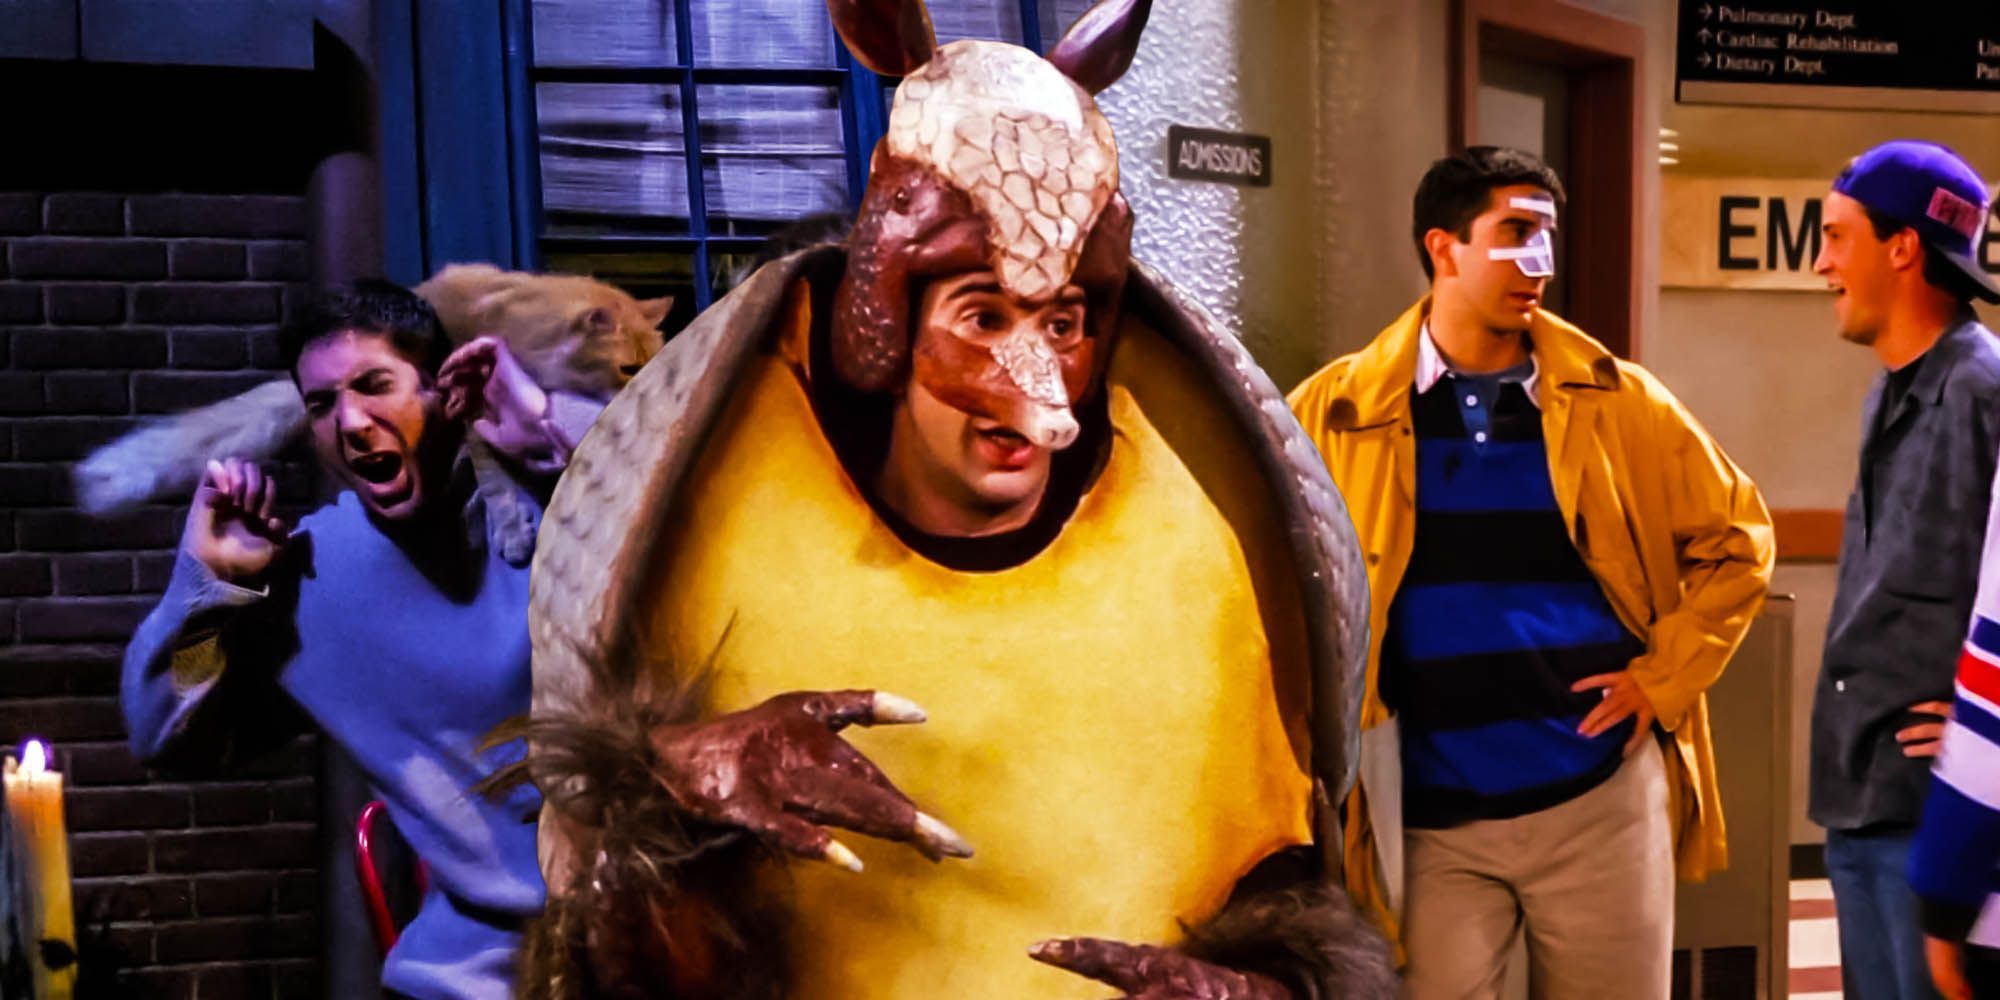 Friends cast personal favorite episodes the one with the blackout holiday armadillo george Stephanopoulos